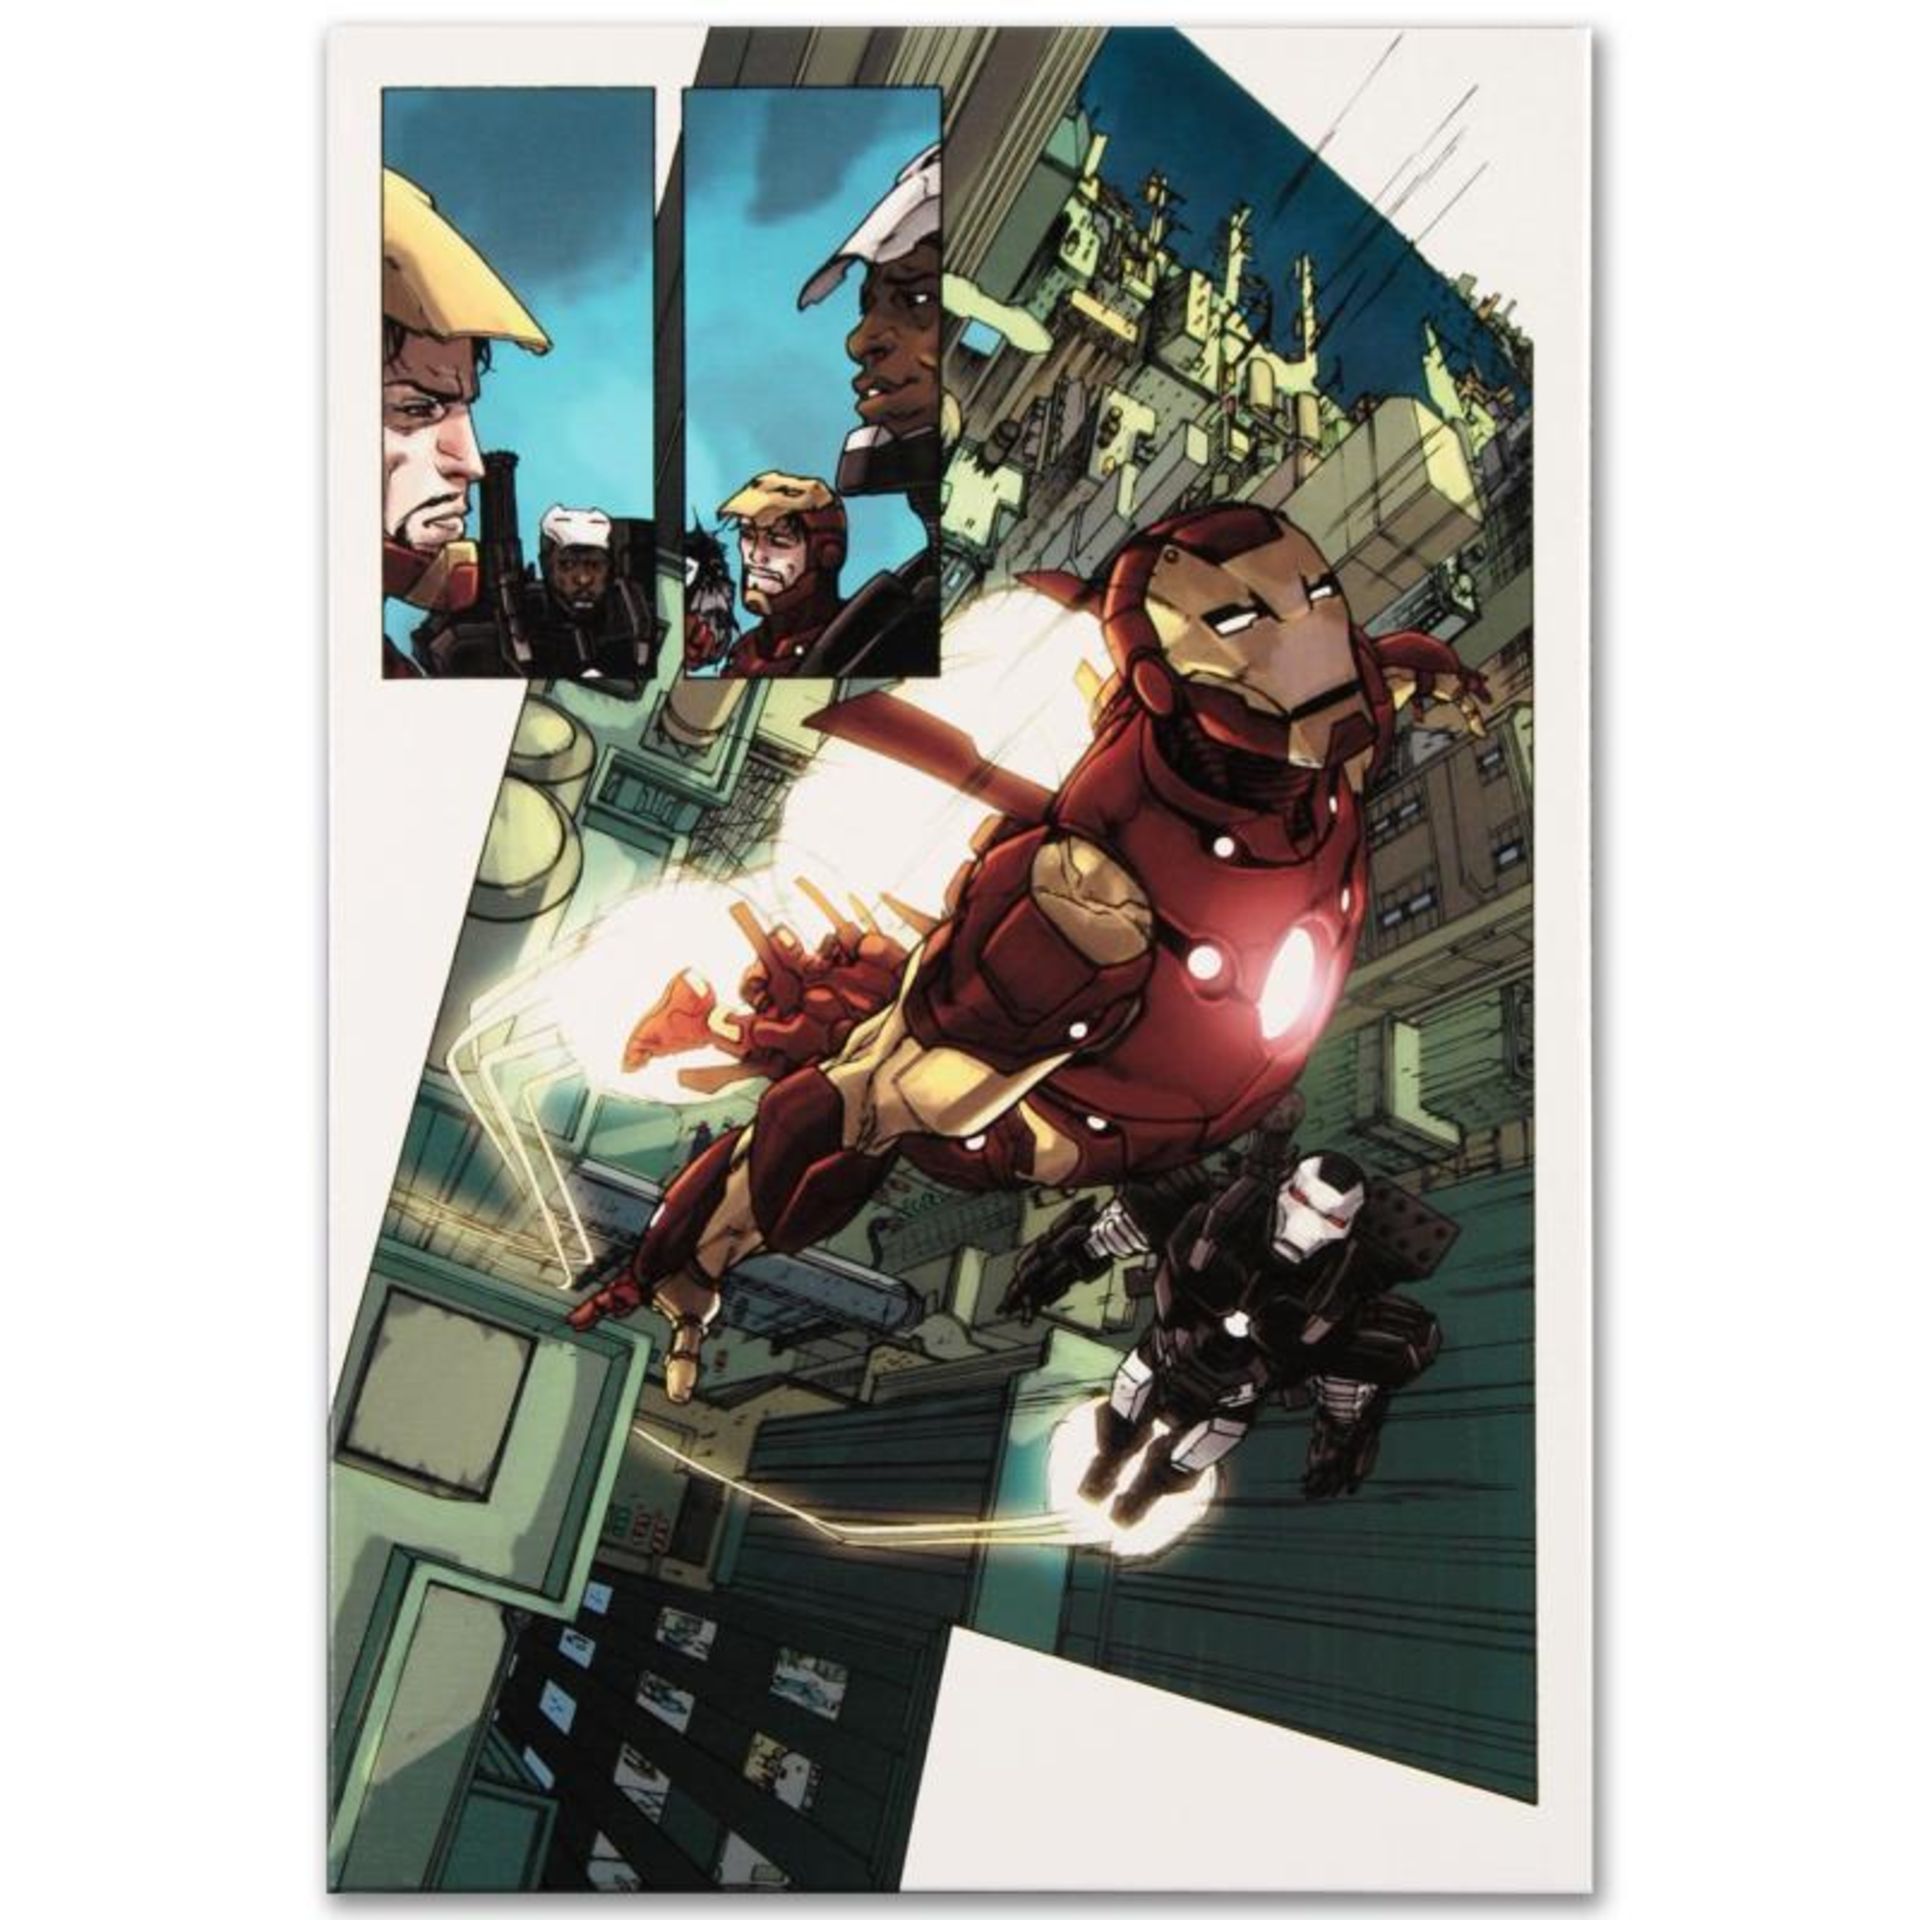 Marvel Comics "Iron Man 2.0 #1" Numbered Limited Edition Giclee on Canvas by Bar